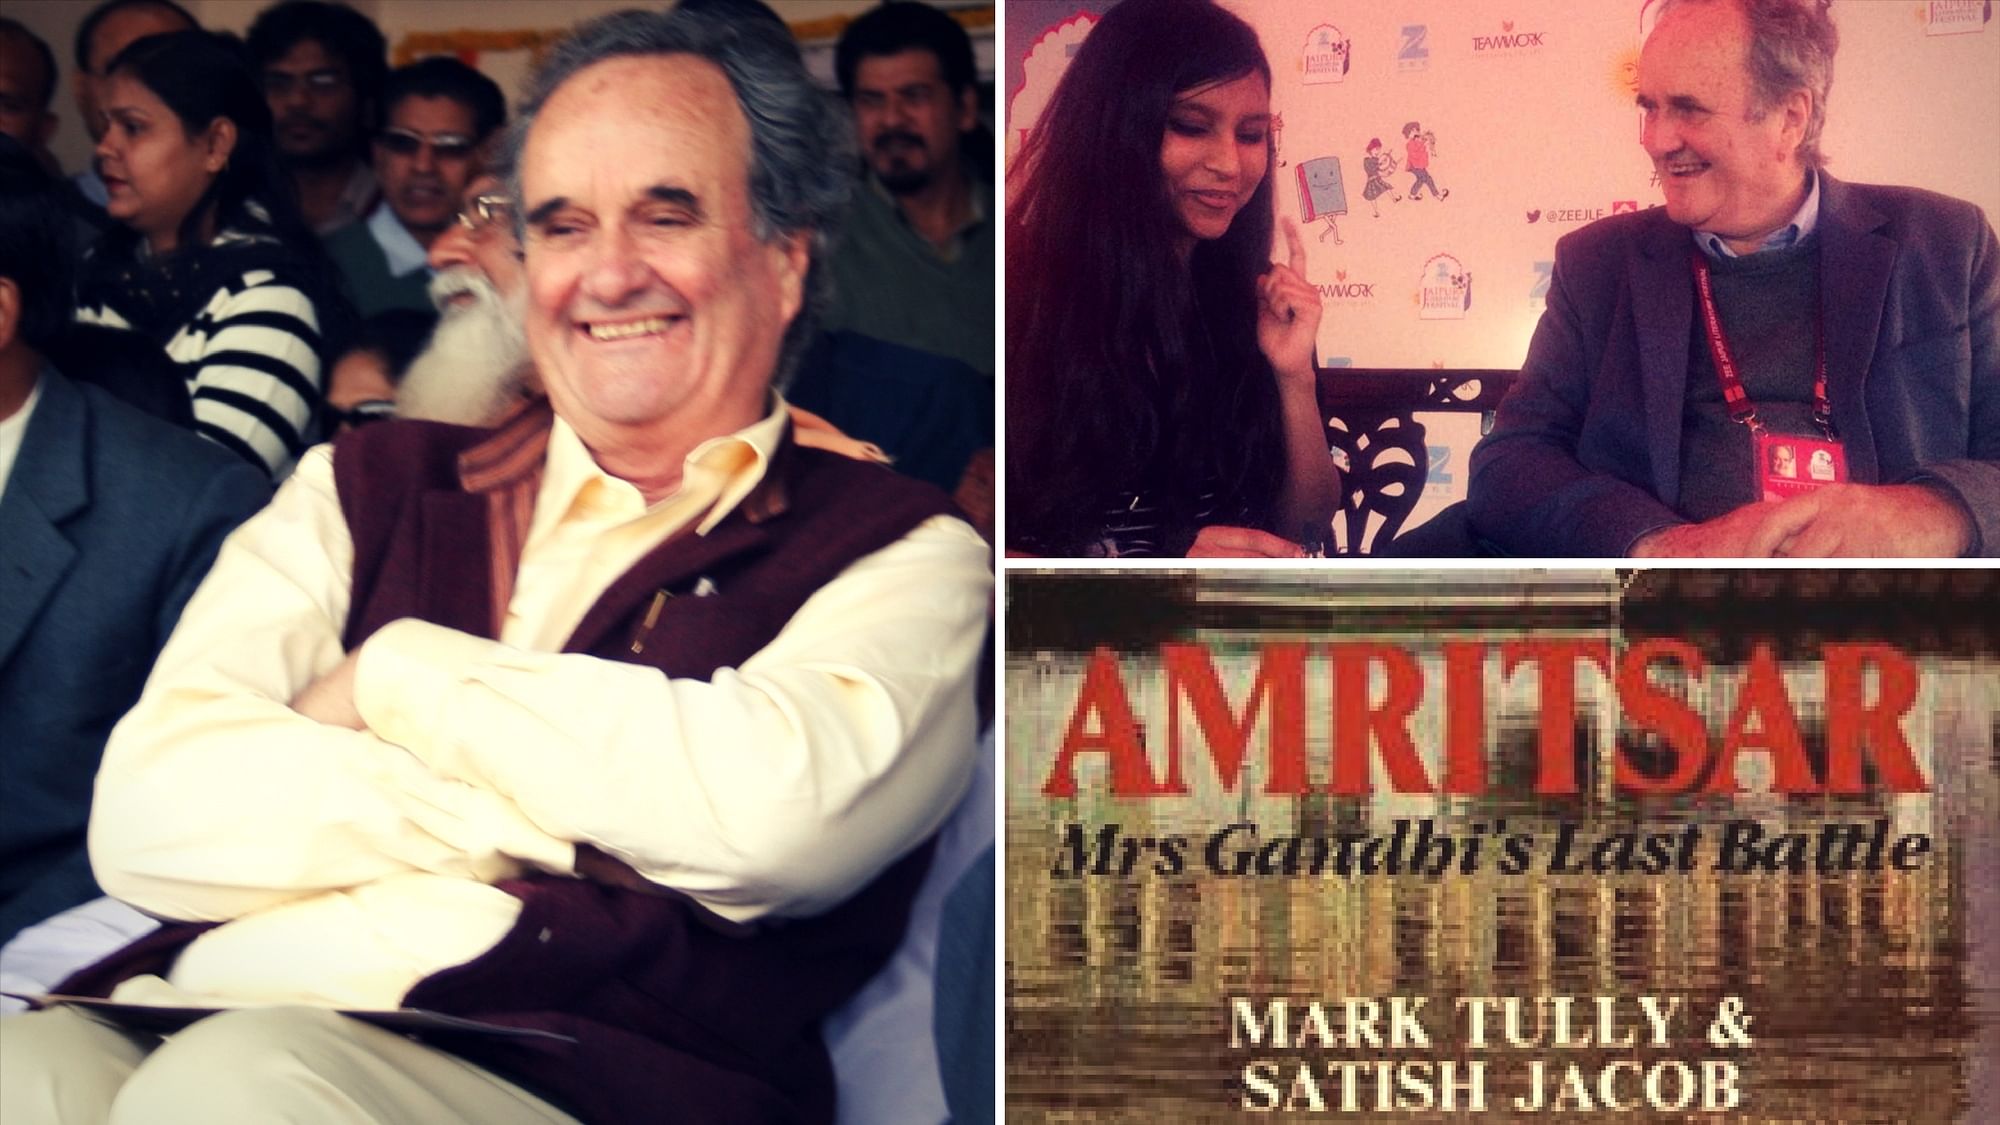 Sir Mark Tully is fondly considered one of India’s own.